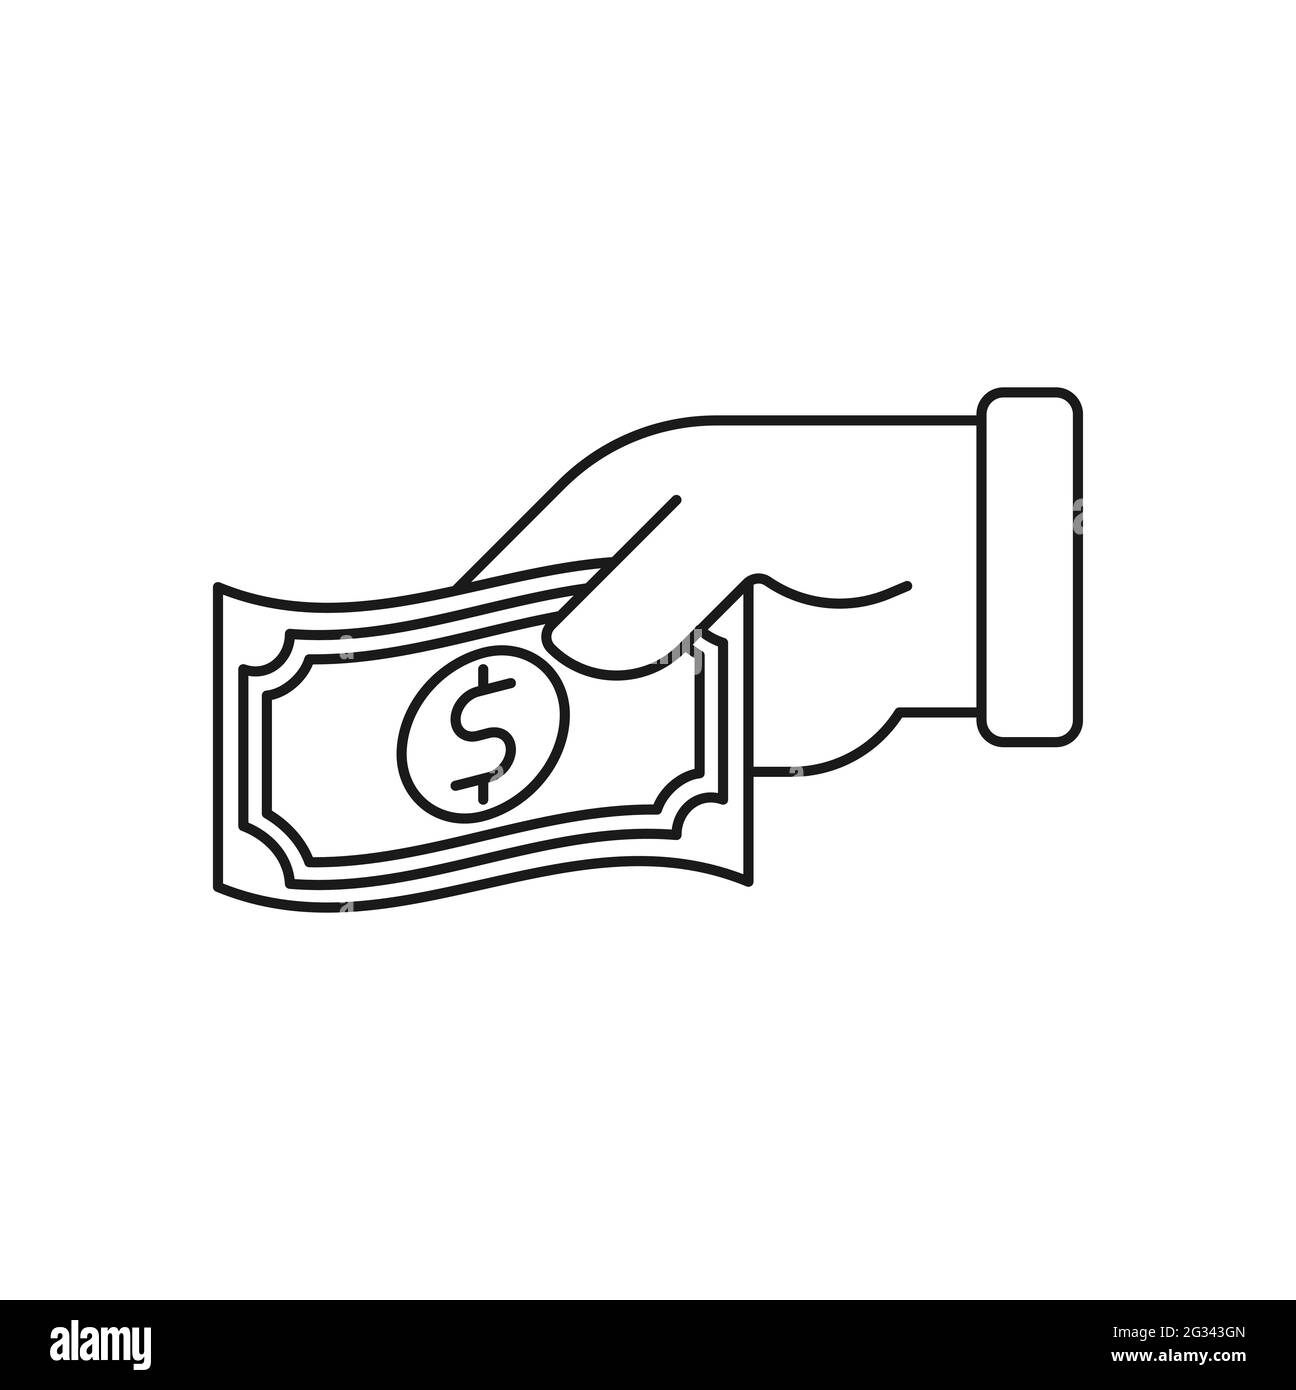 Money with Hand icon Vector Illustration. Money Cash on Hand icon vector design concept for Payment, Finance, Currency and Trading Business. Dollar Mo Stock Vector